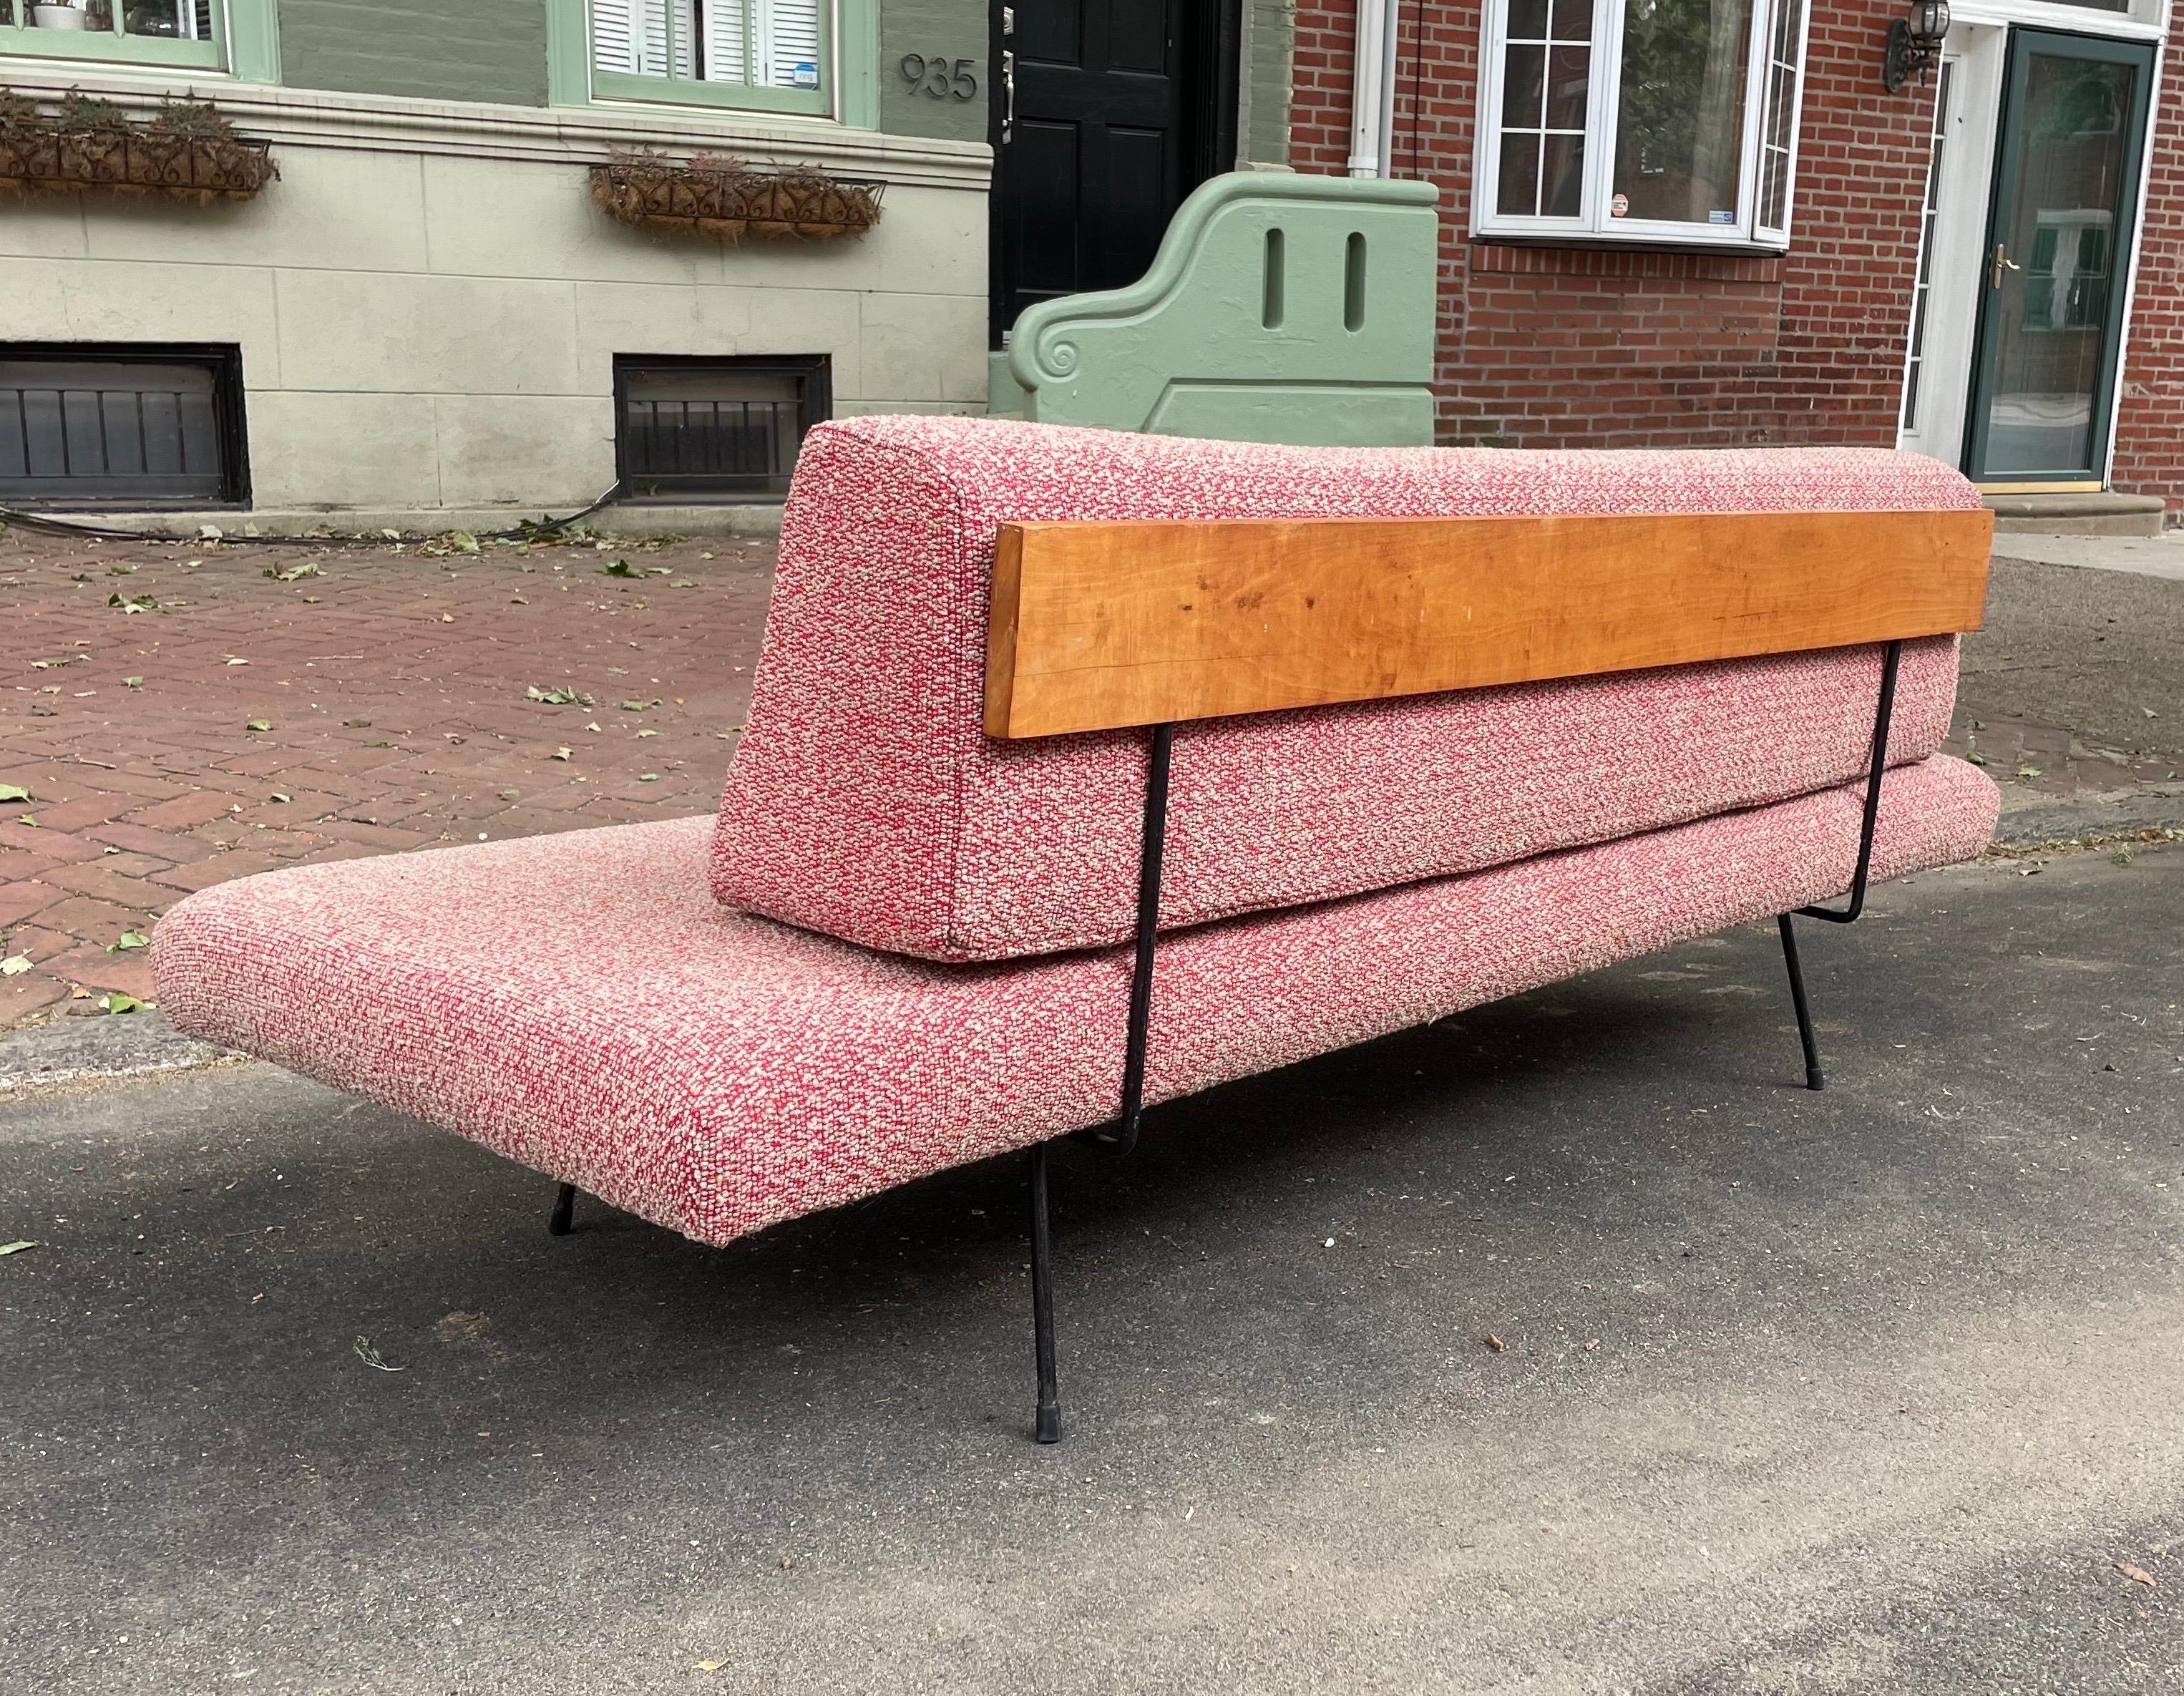 An early and rare 102-R daybed by Adrian Pearsall for Craft Associates. Authenticated by the Pearsall family (certificate can be provided) as one of the first pieces ever made by Adrian Pearsall. Restored and reupholstered in a super nubby but soft